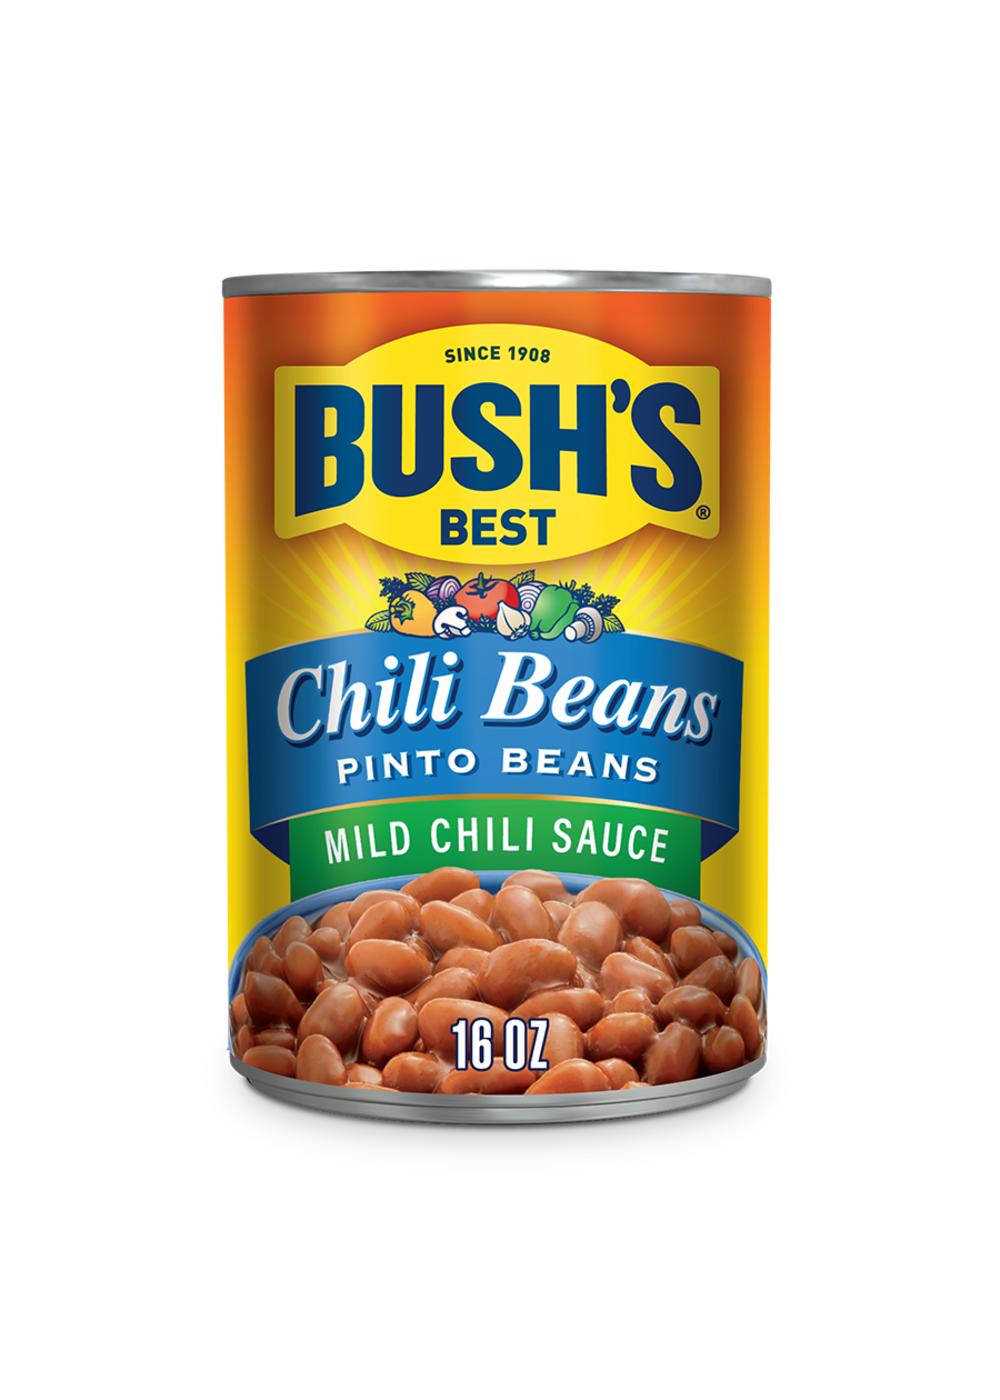 Bush's Best Pinto Beans in a Mild Chili Sauce; image 1 of 5